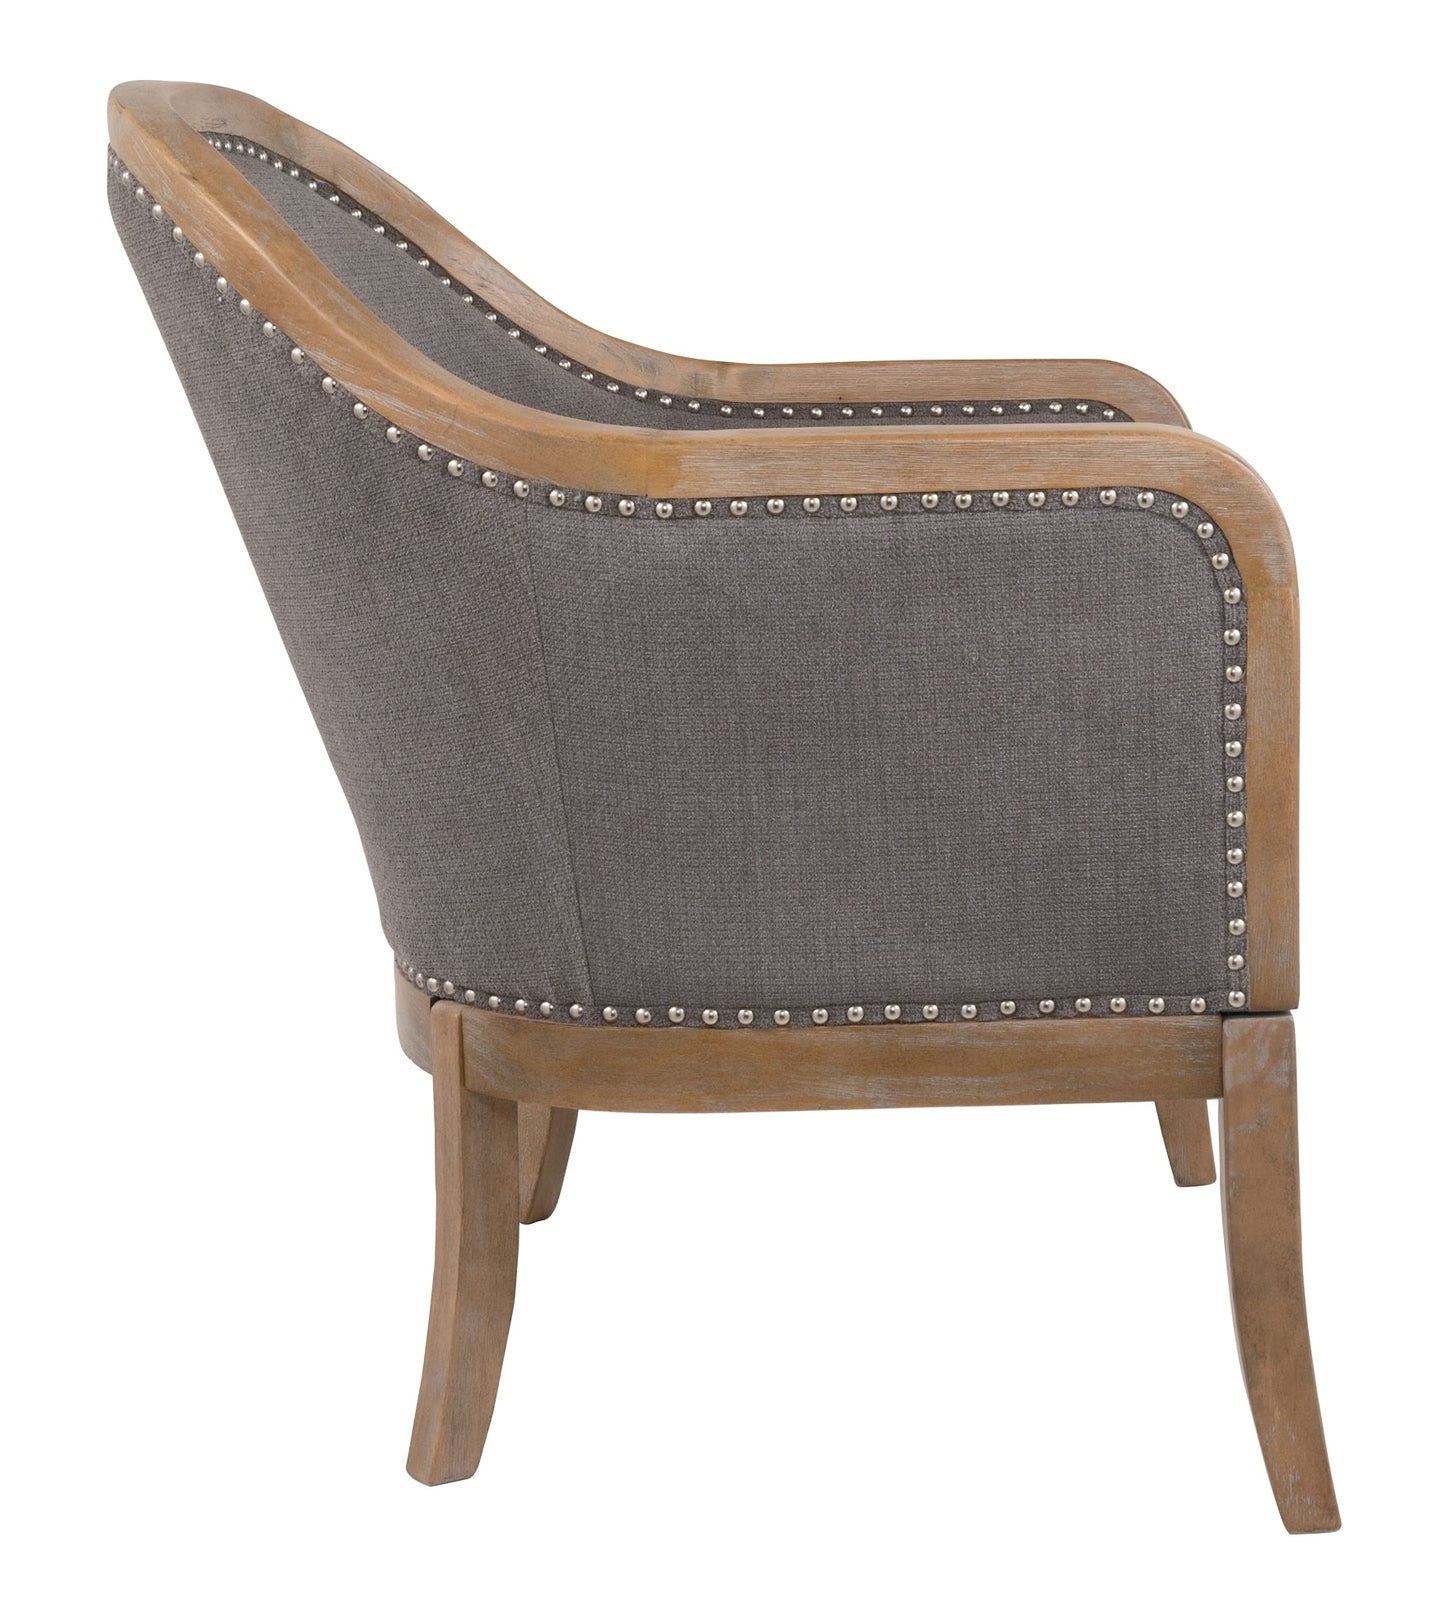 Engineer Accent Chair at Cloud 9 Mattress & Furniture furniture, home furnishing, home decor